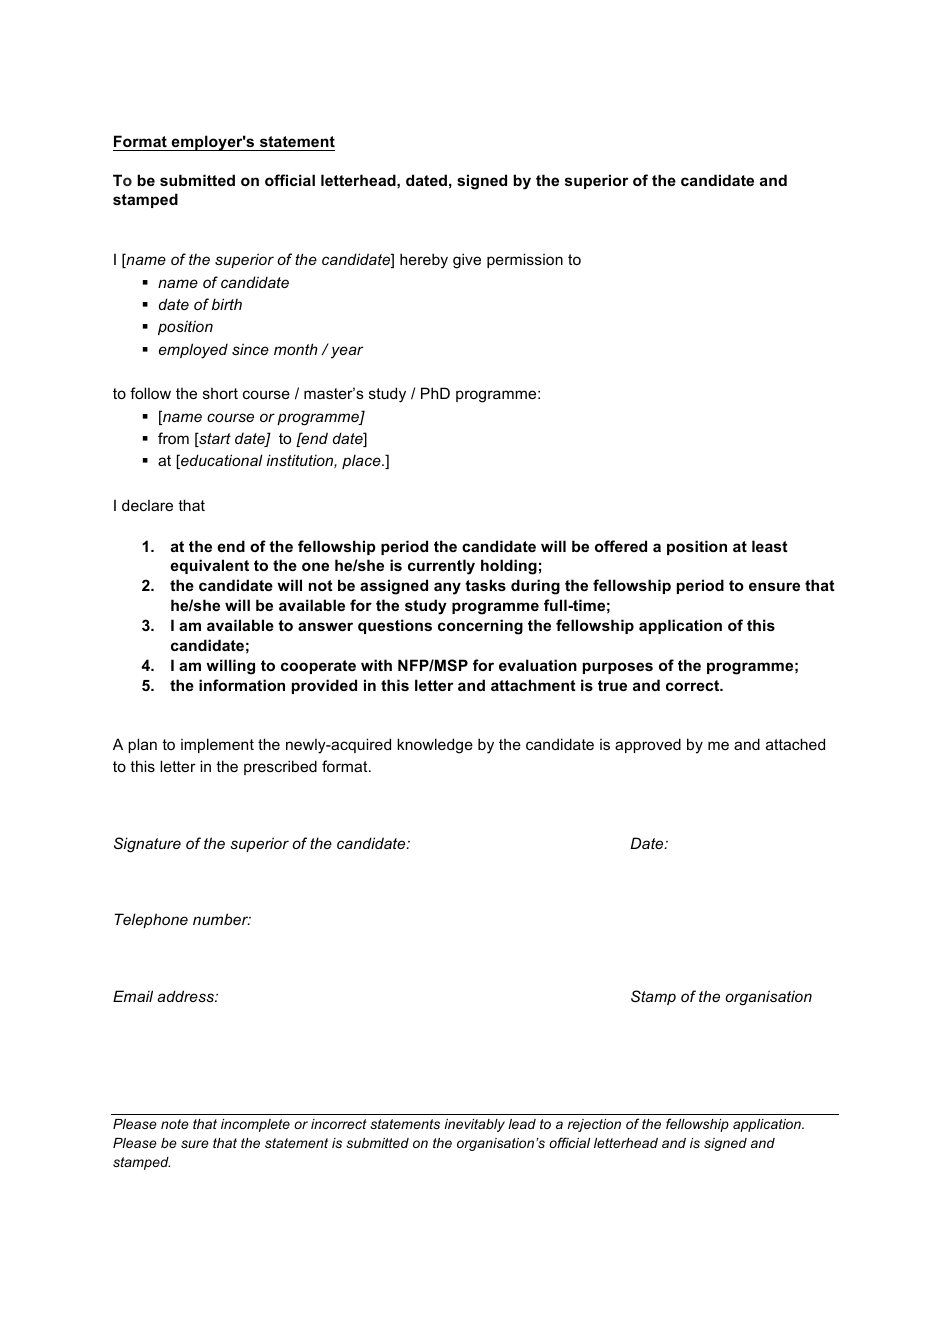 Sample Employer's Statement Template